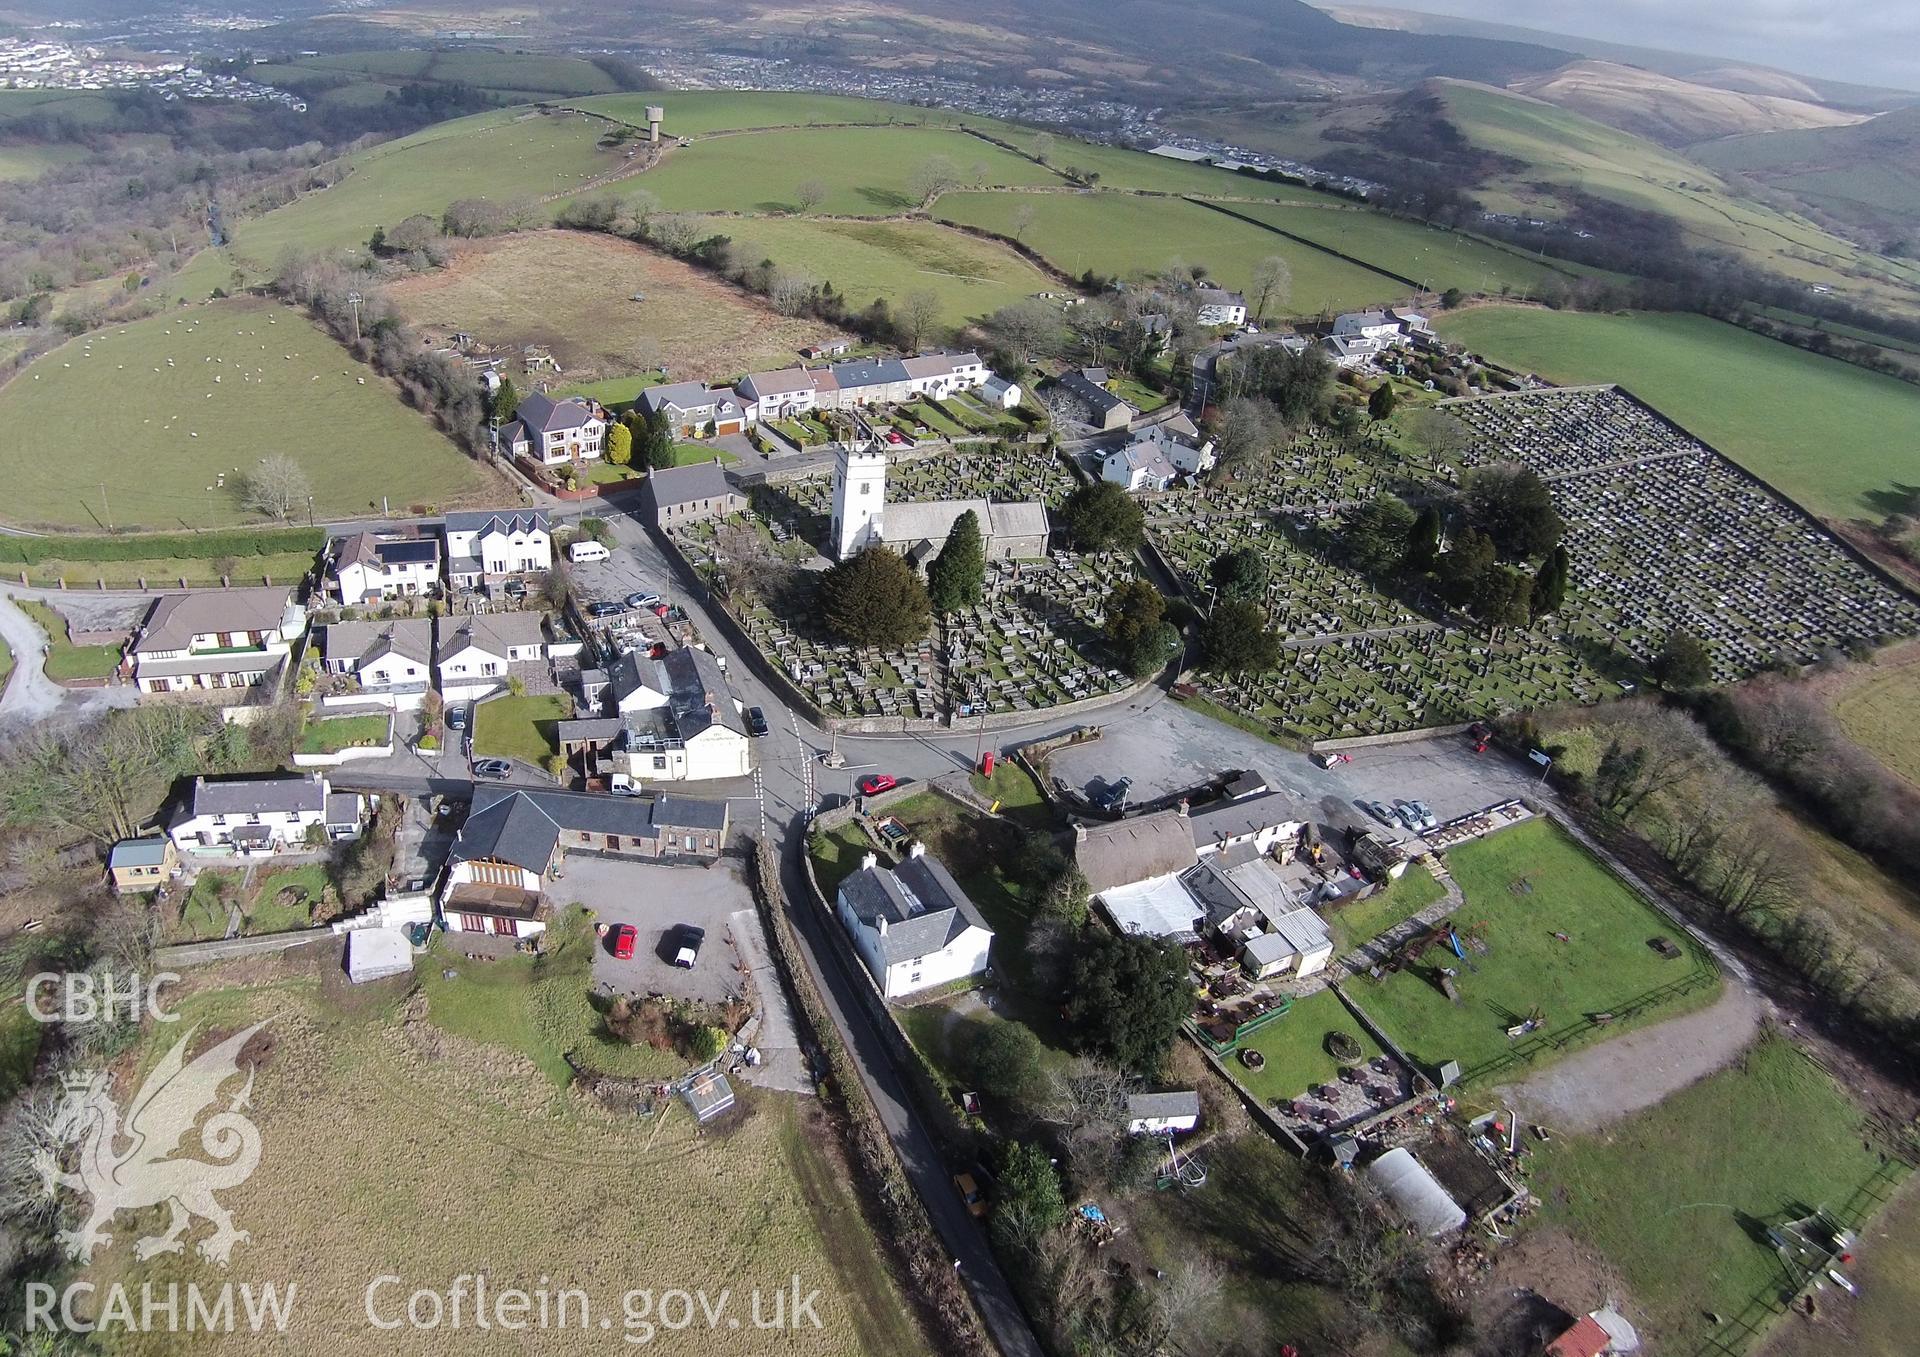 Aerial photograph showing Llangynwyd Church and village taken by Paul Davis, 27th February 2015.